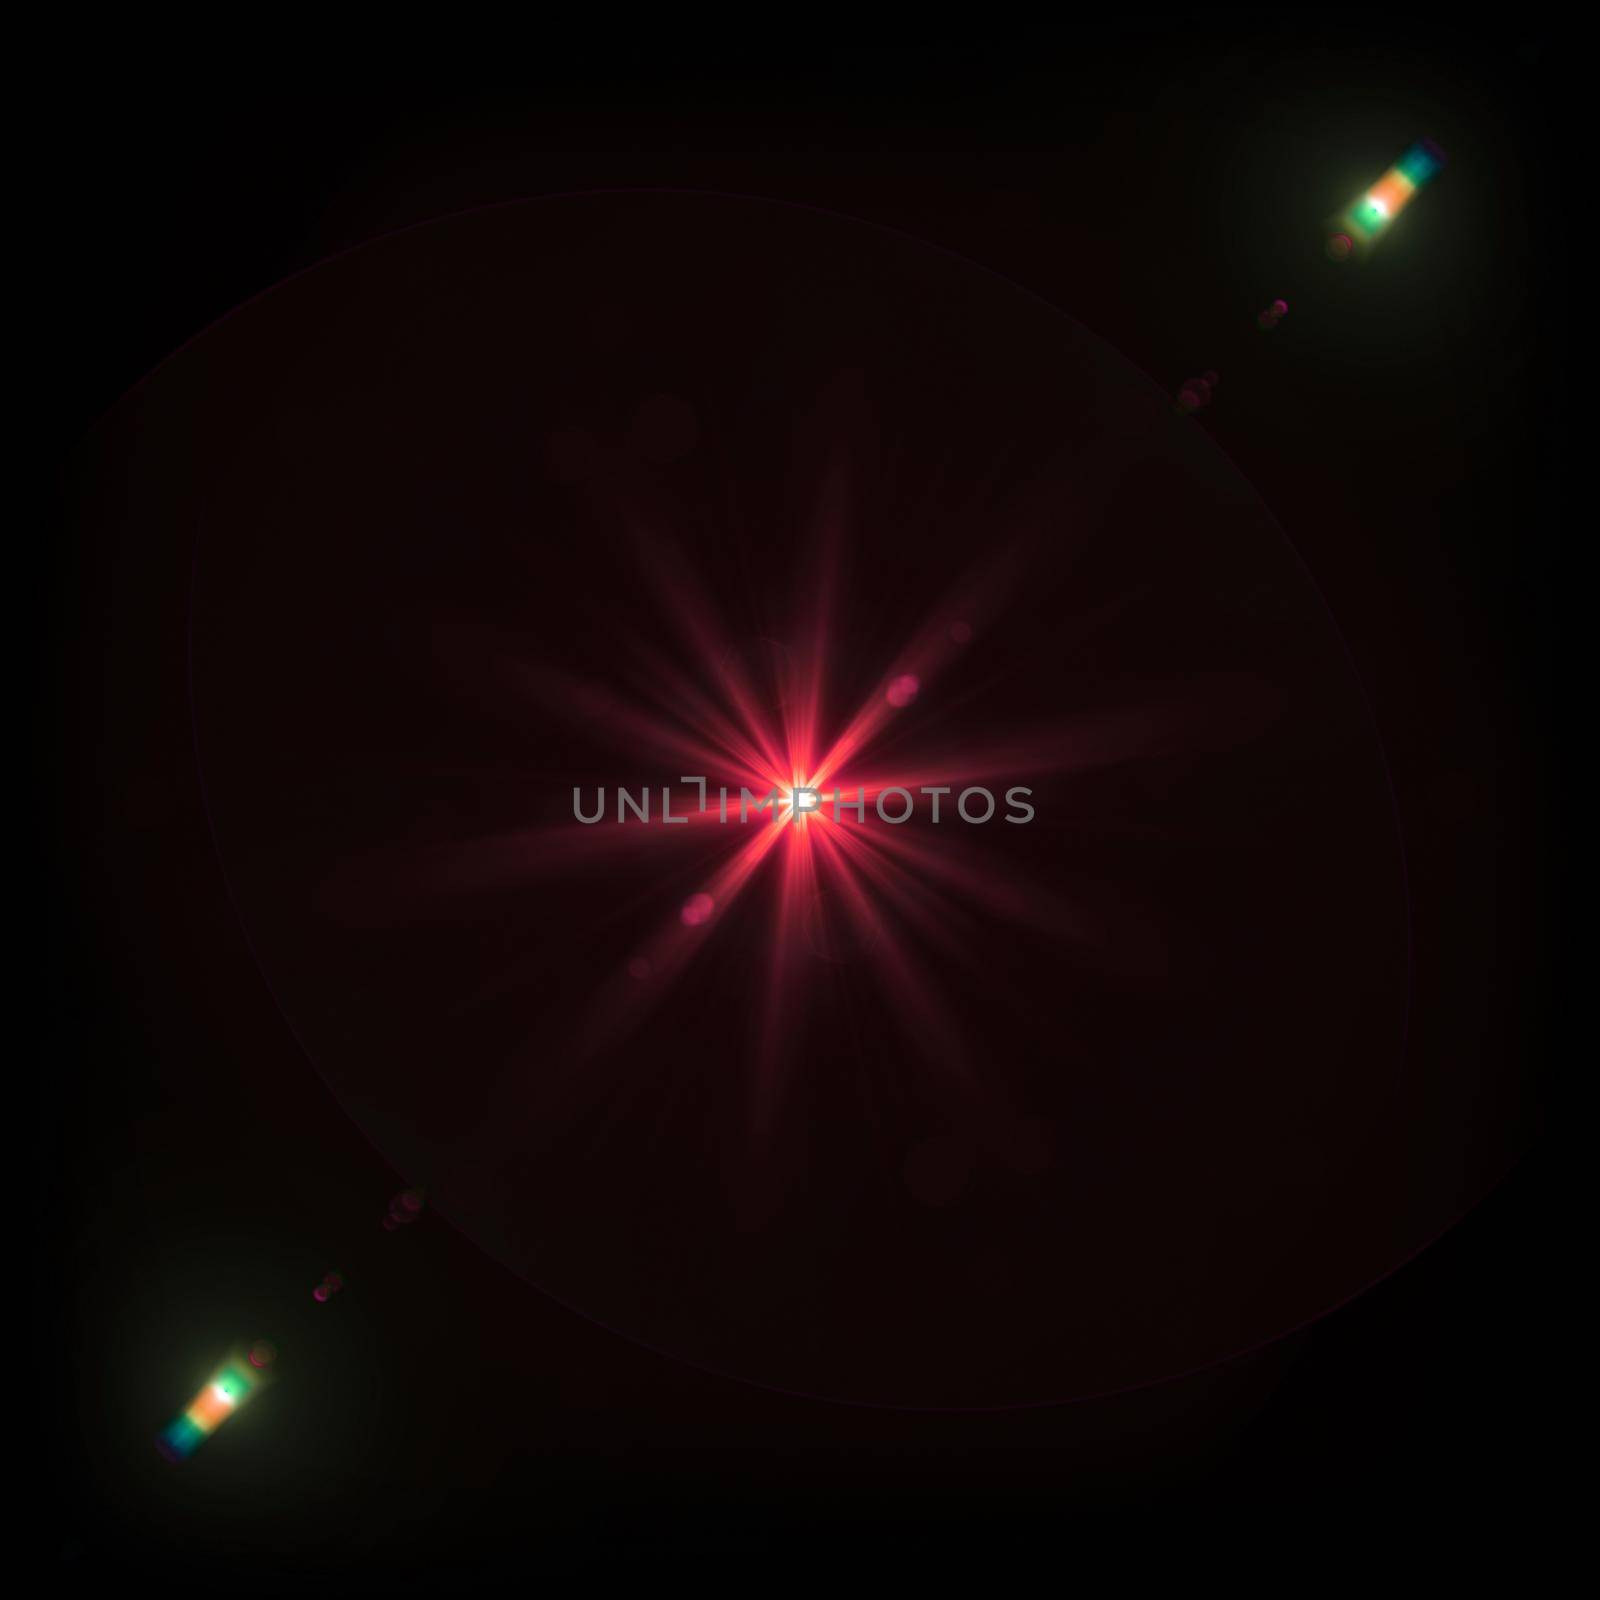 Red light Lens flare on black background. Digital lens flare with bright light isolated with a black background. Used for textures and materials.